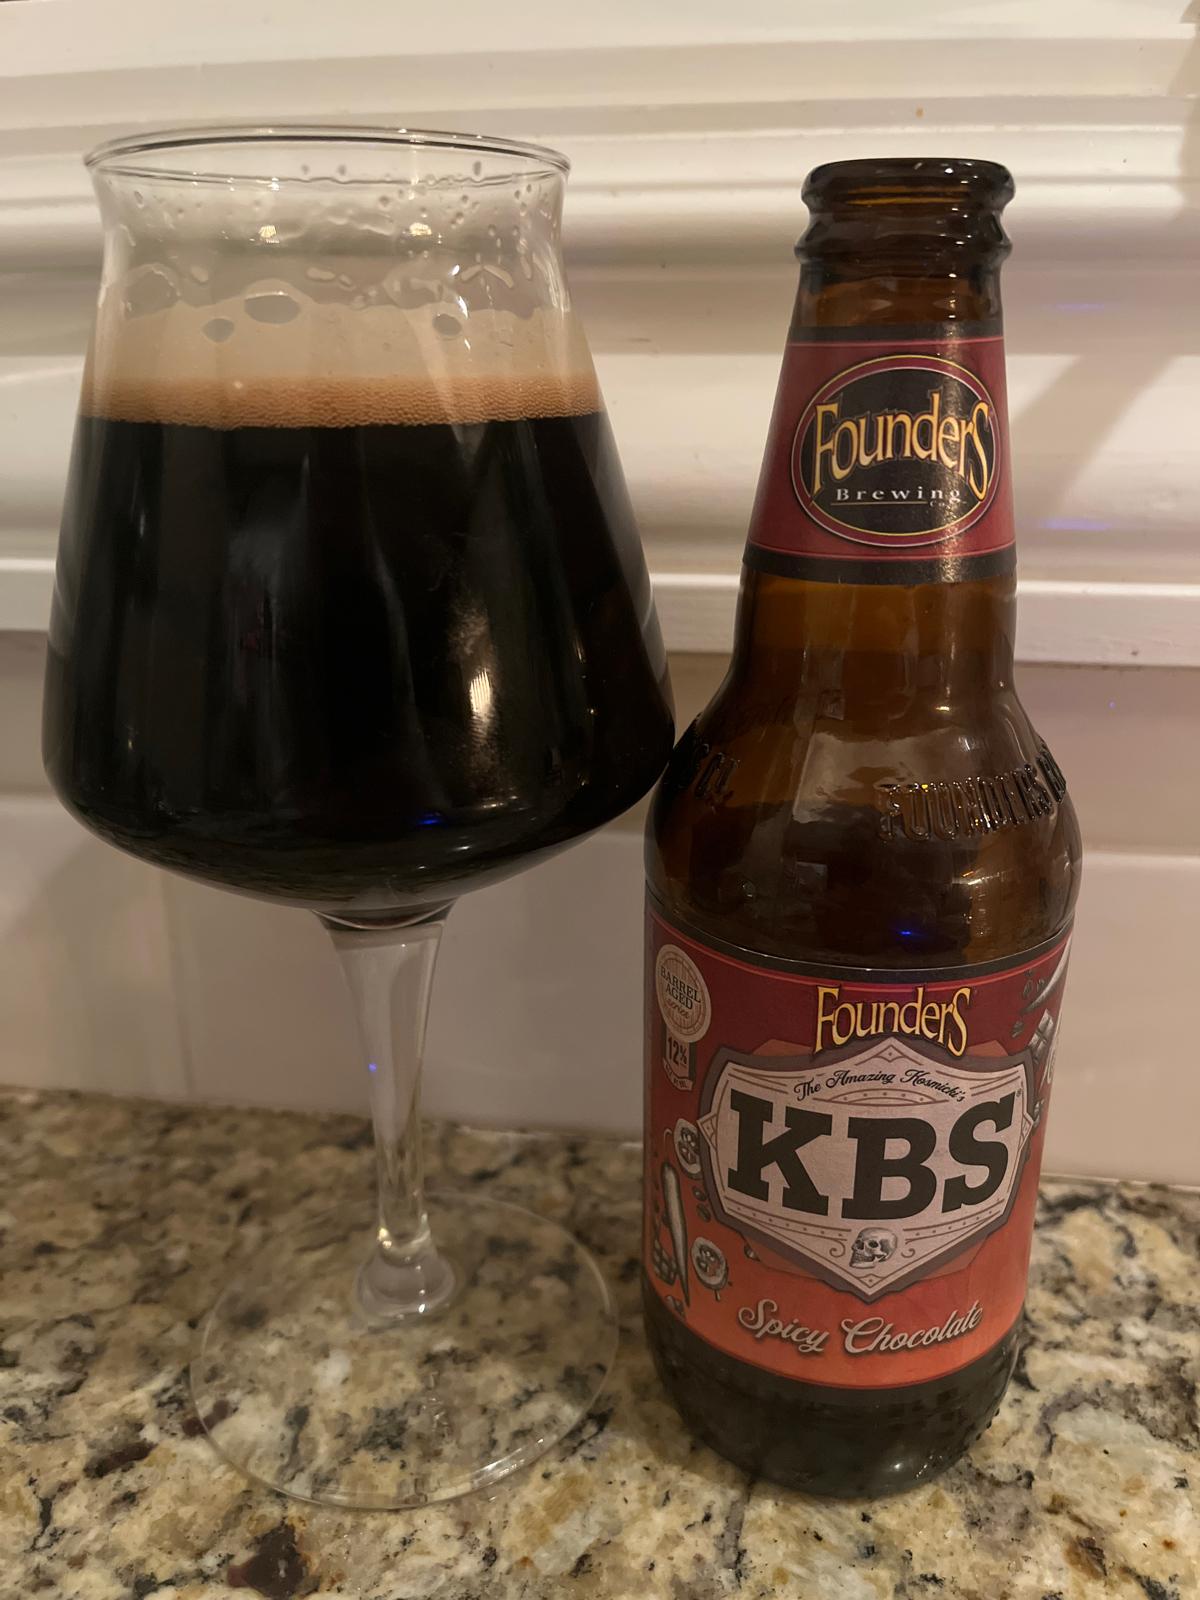 KBS Spicy Chocolate